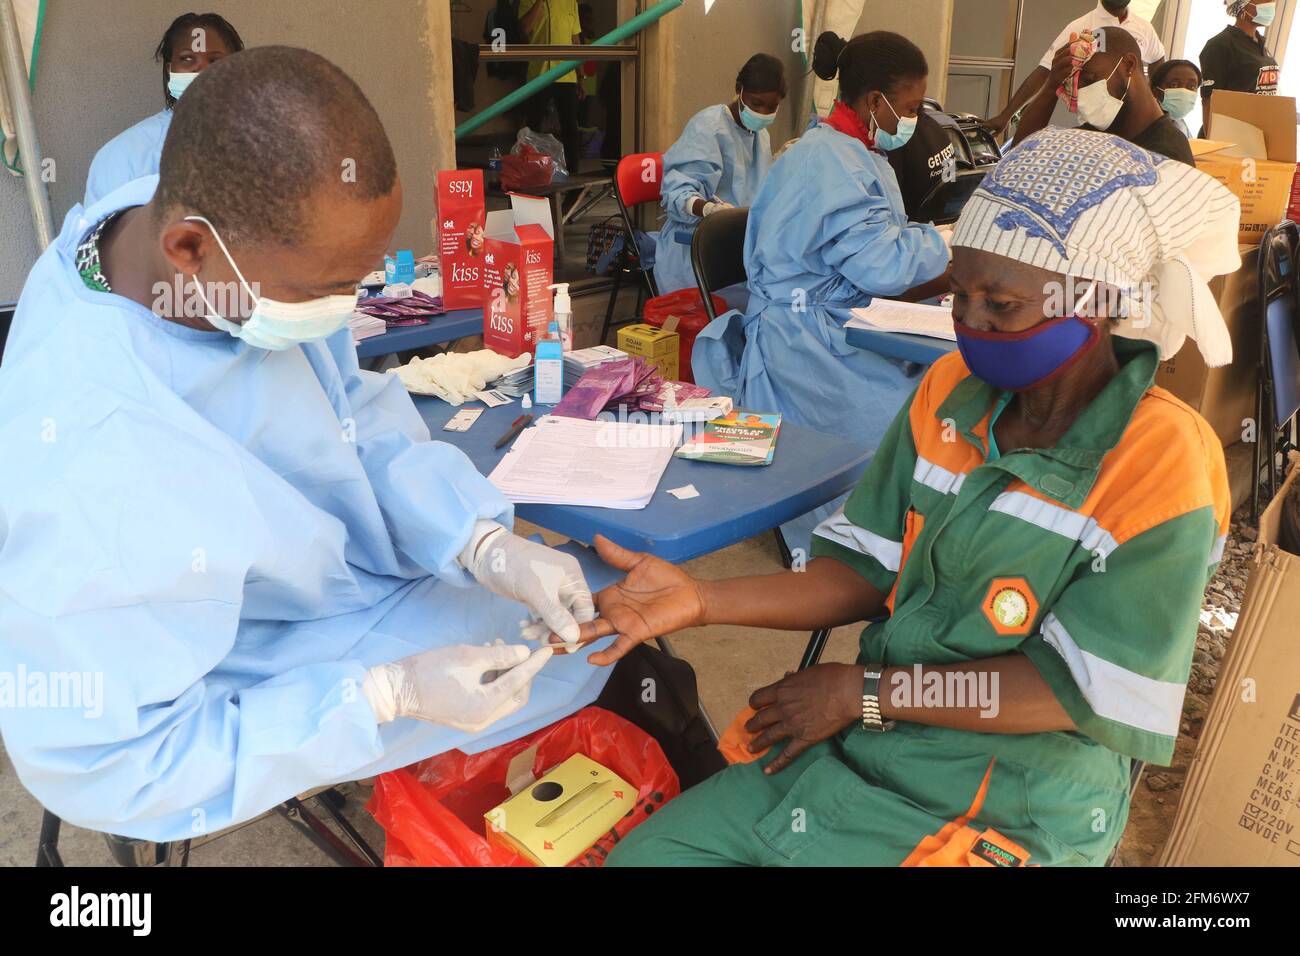 A health worker takes the blood sample of a Lagos state waste bin worker for an HIV/AIDS test on International Workers Day. International Workers Day is celebrated on every May 1, across the World, and it is observed to spread awareness among people, regarding the rights of workers and to mark their achievements. Lagos, Nigeria. Stock Photo